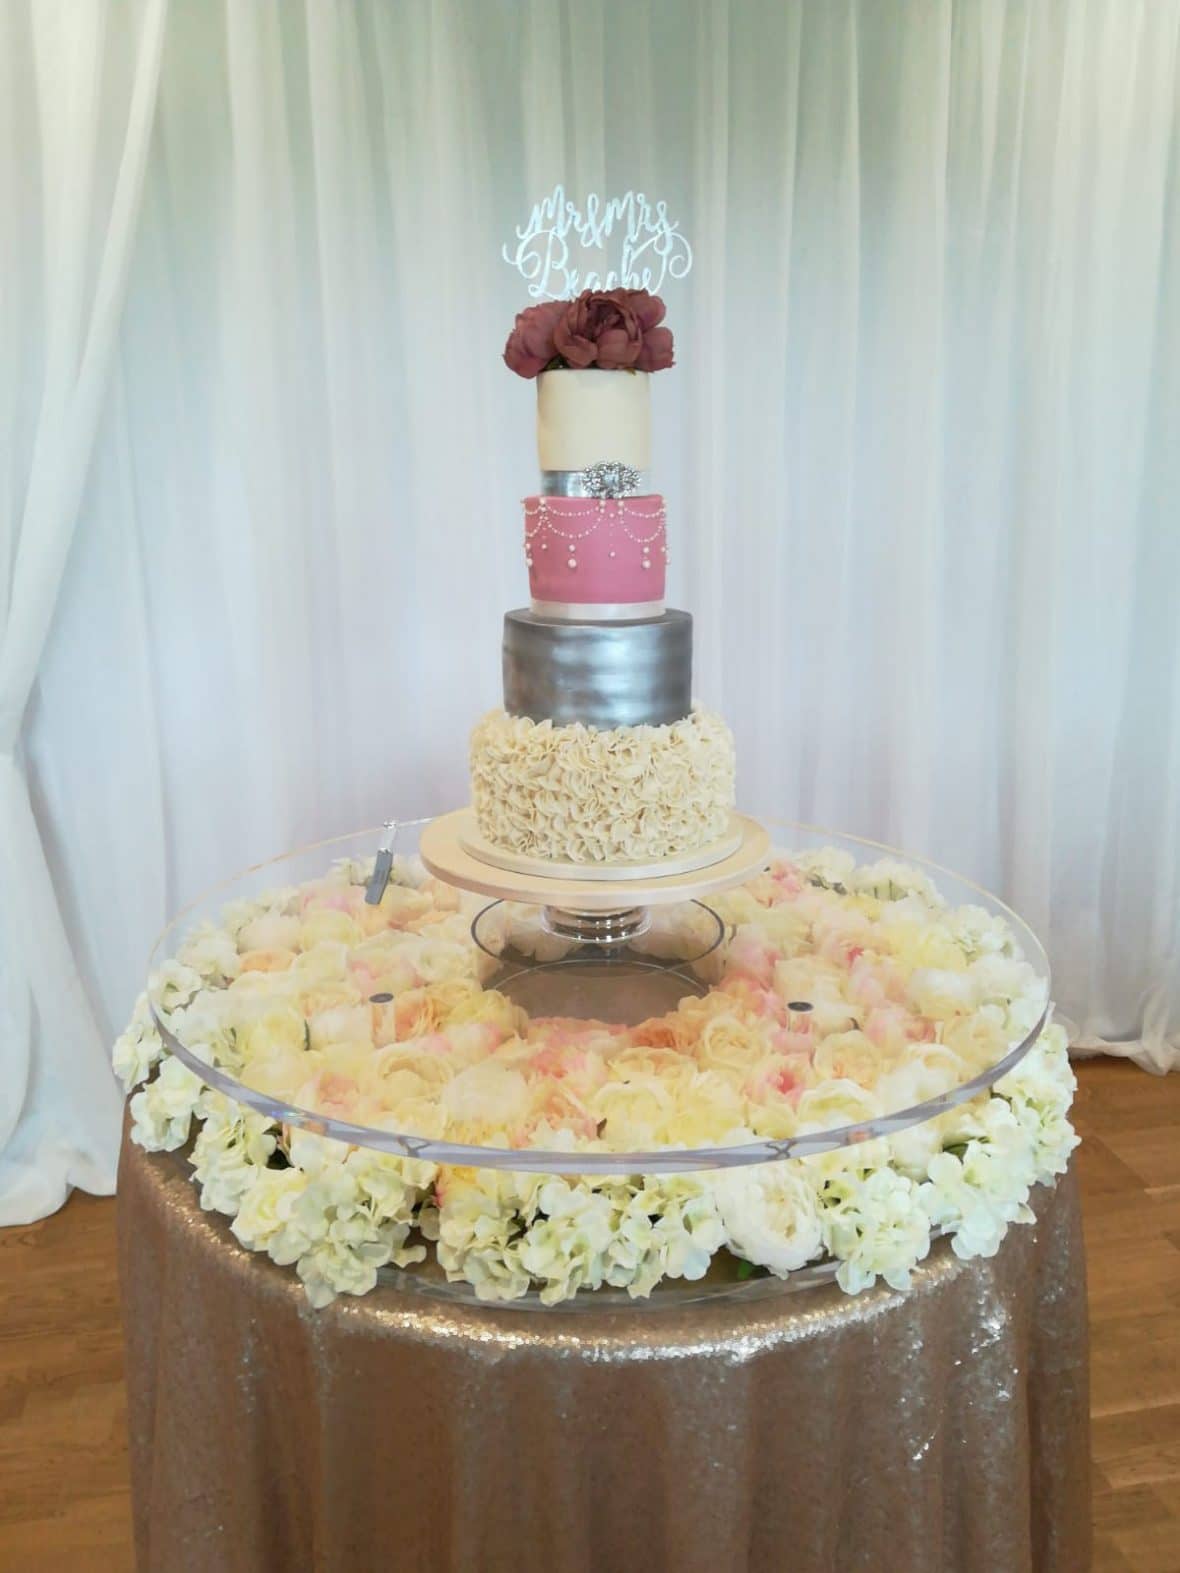 The perfect stand to display your wedding cake